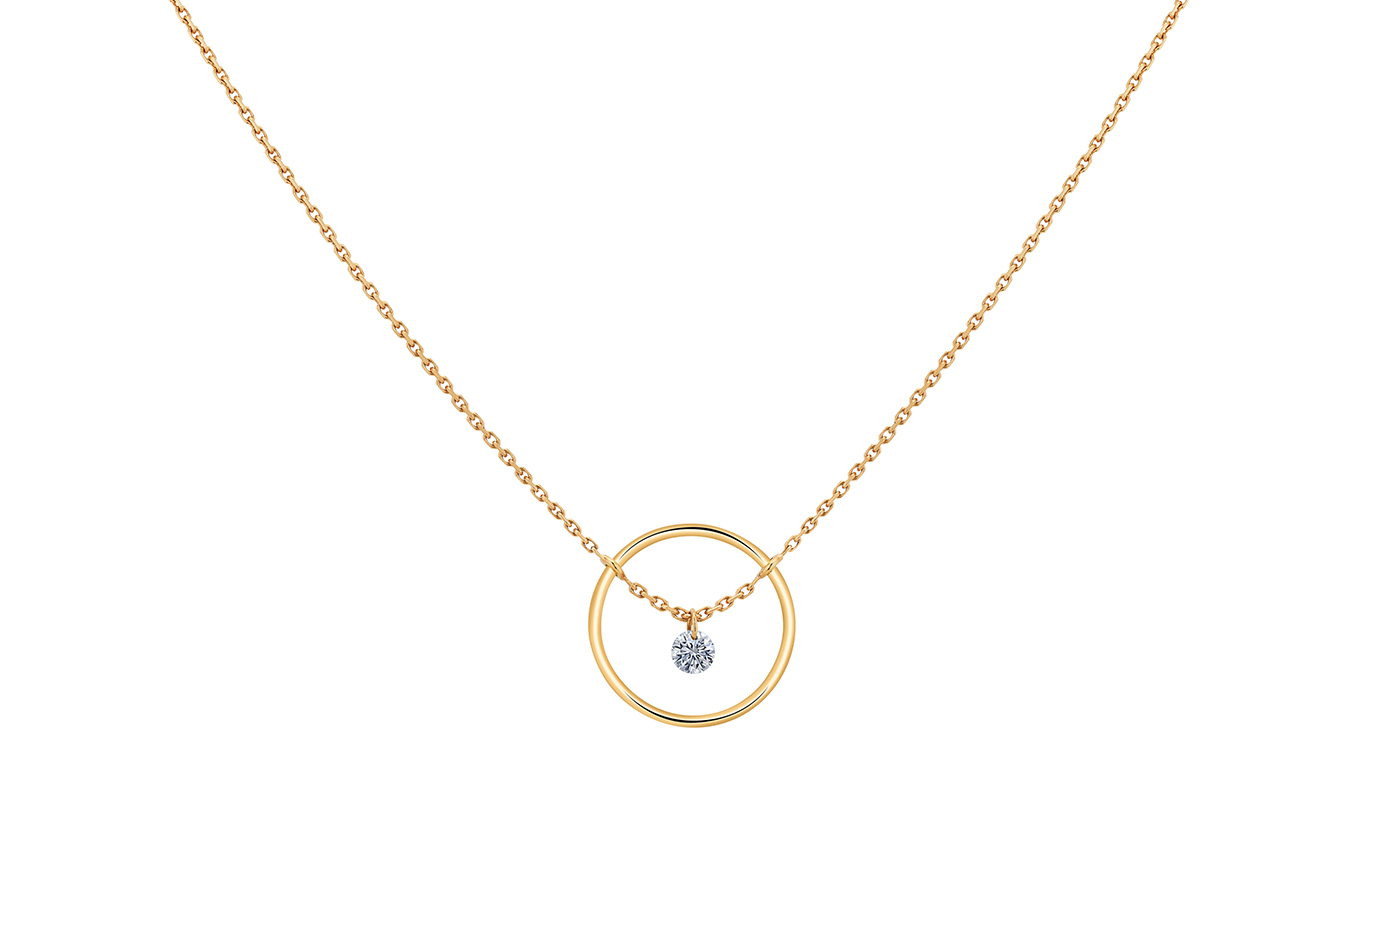 Collier EXCENTRIQUE, diamant GSI, 0,22 ct approx., or 18KT, 2,1gr. 